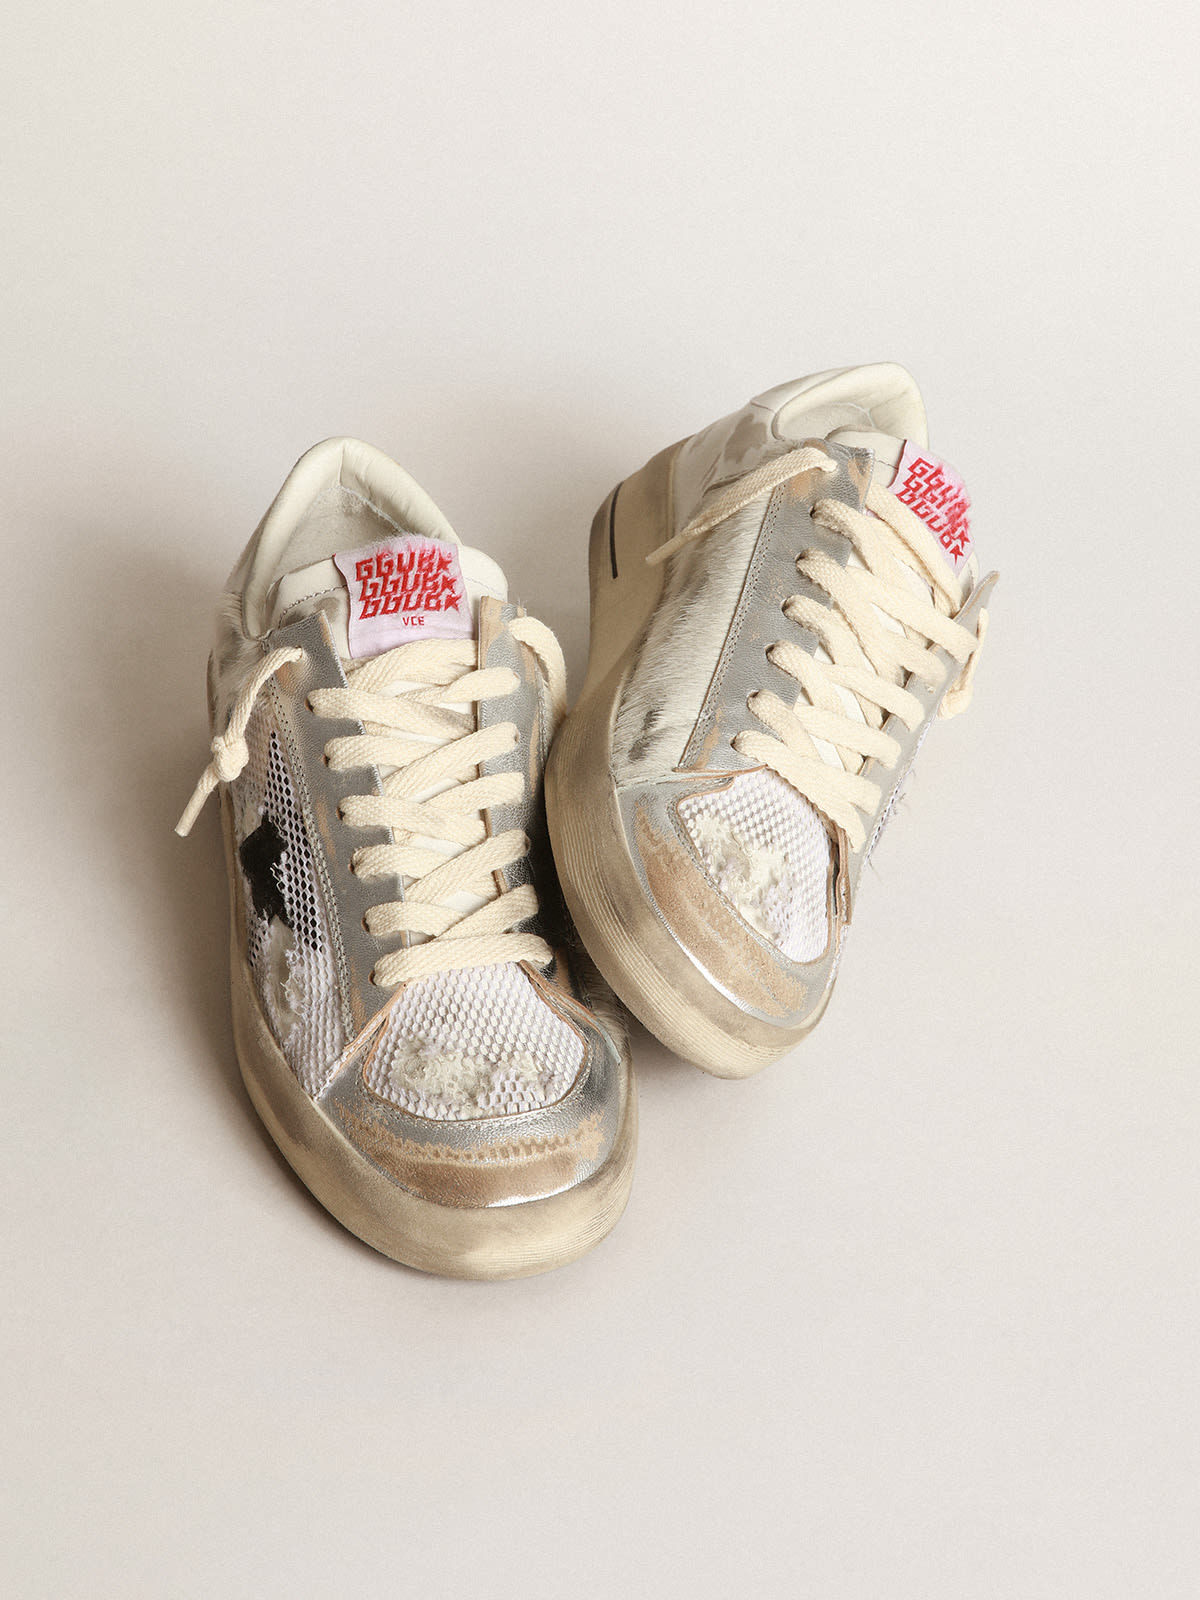 Golden Goose - Stardan LAB sneakers in white pony skin and leather with black suede star in 